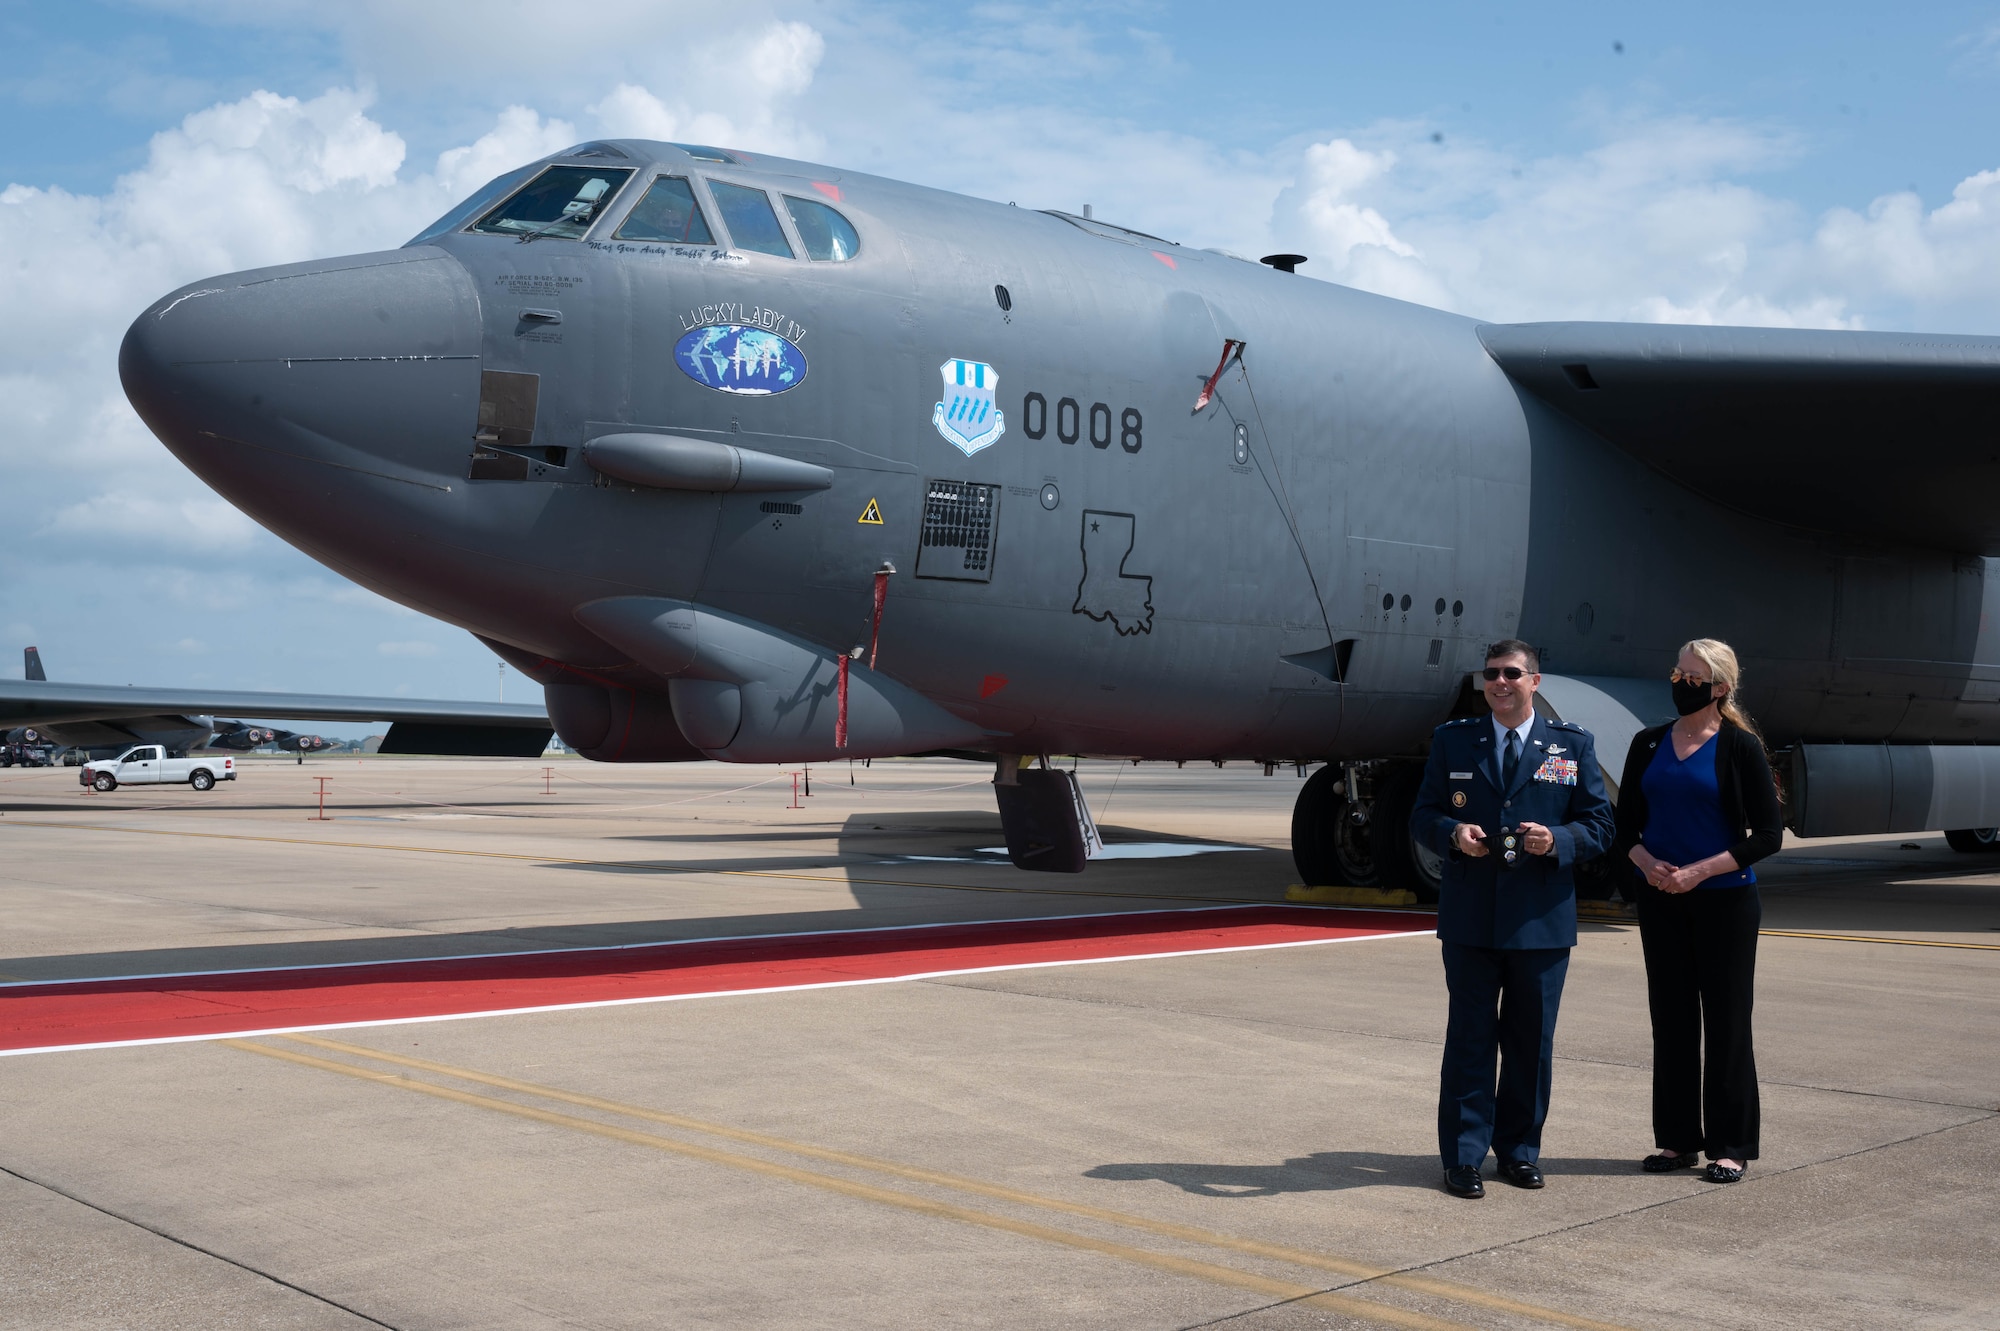 Maj. Gen. Andrew Gebara, incoming 8th Air Force and Joint-Global Strike Operations Center commander, and his wife stand outside of the 8th Air Force commander's B-52H Stratofortress at Barksdale Air Force Base, La., August 16, 2021. Gebara was introduced to his aircraft after he assumed command of the 8th Air Force and J-GSOC. (U.S. Air Force photo by Senior Airman Jovante Johnson)